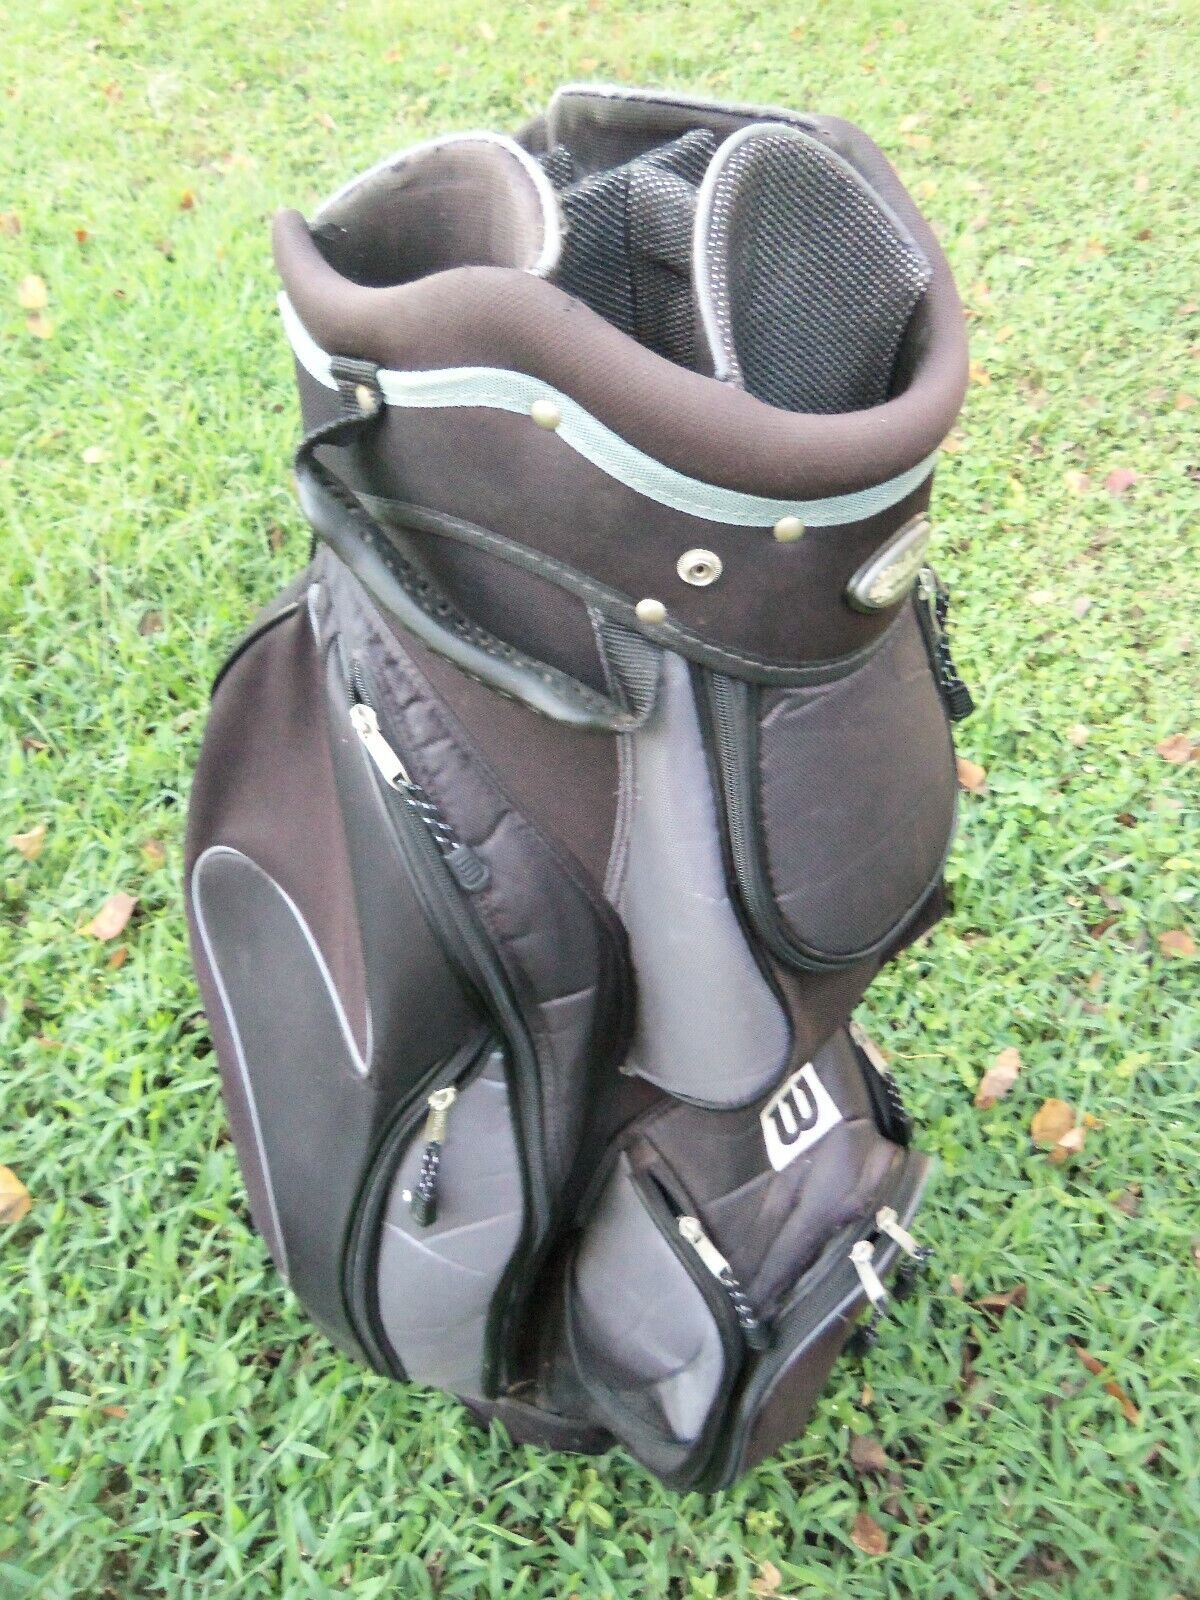 WILSON CART/CARRY GOLF BAG 7 WAY DIVIDER (small hole in front pocket) - $29.99